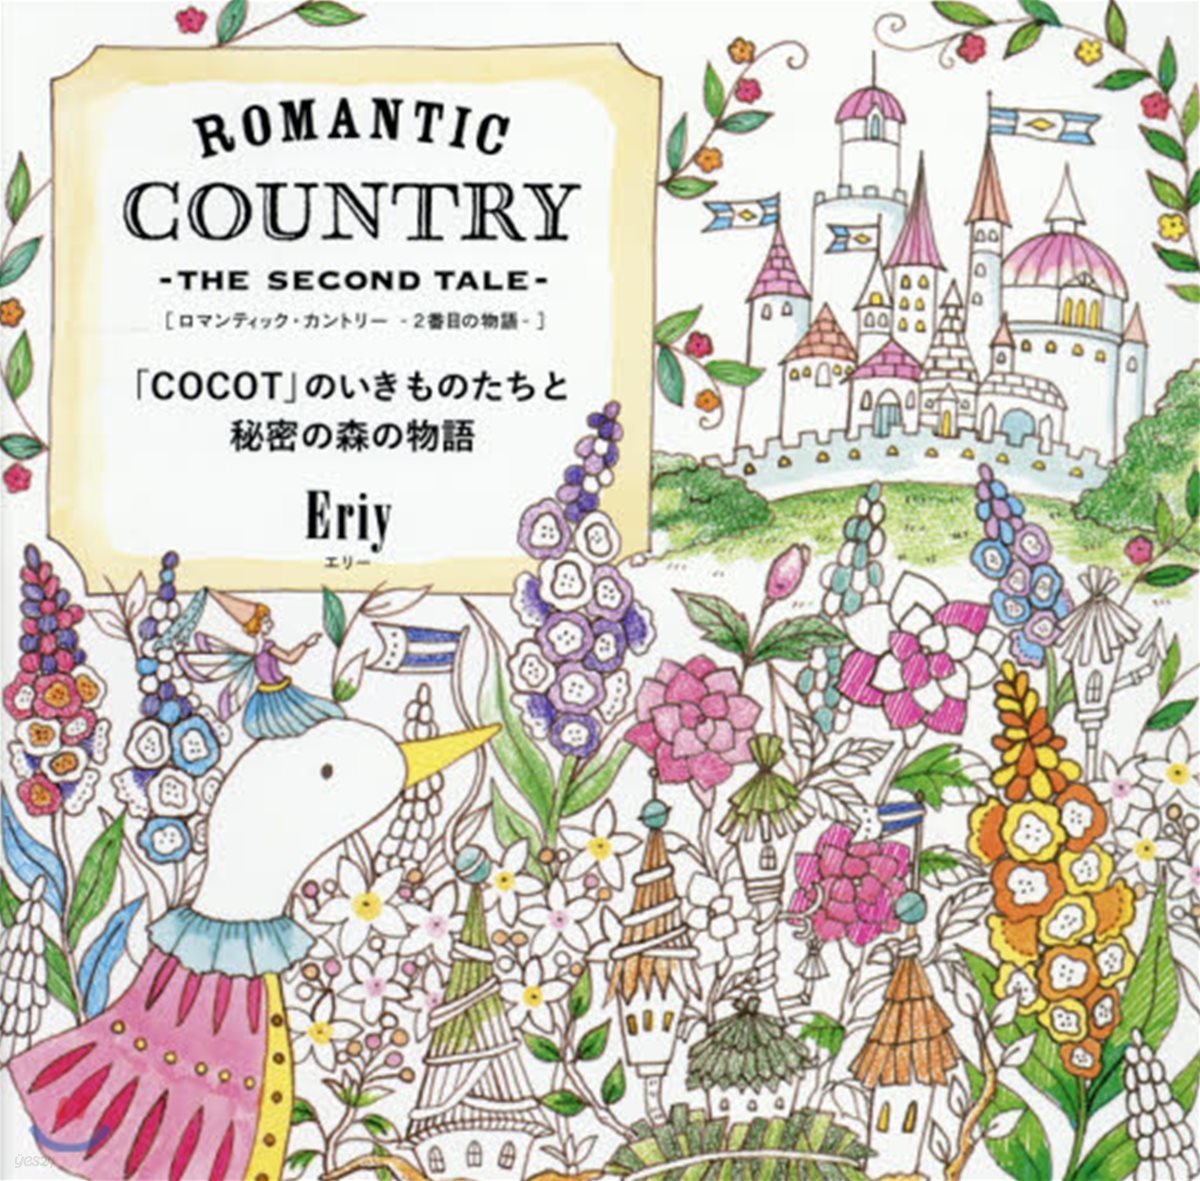 ROMANTIC COUNTRY THE SECOND TALE